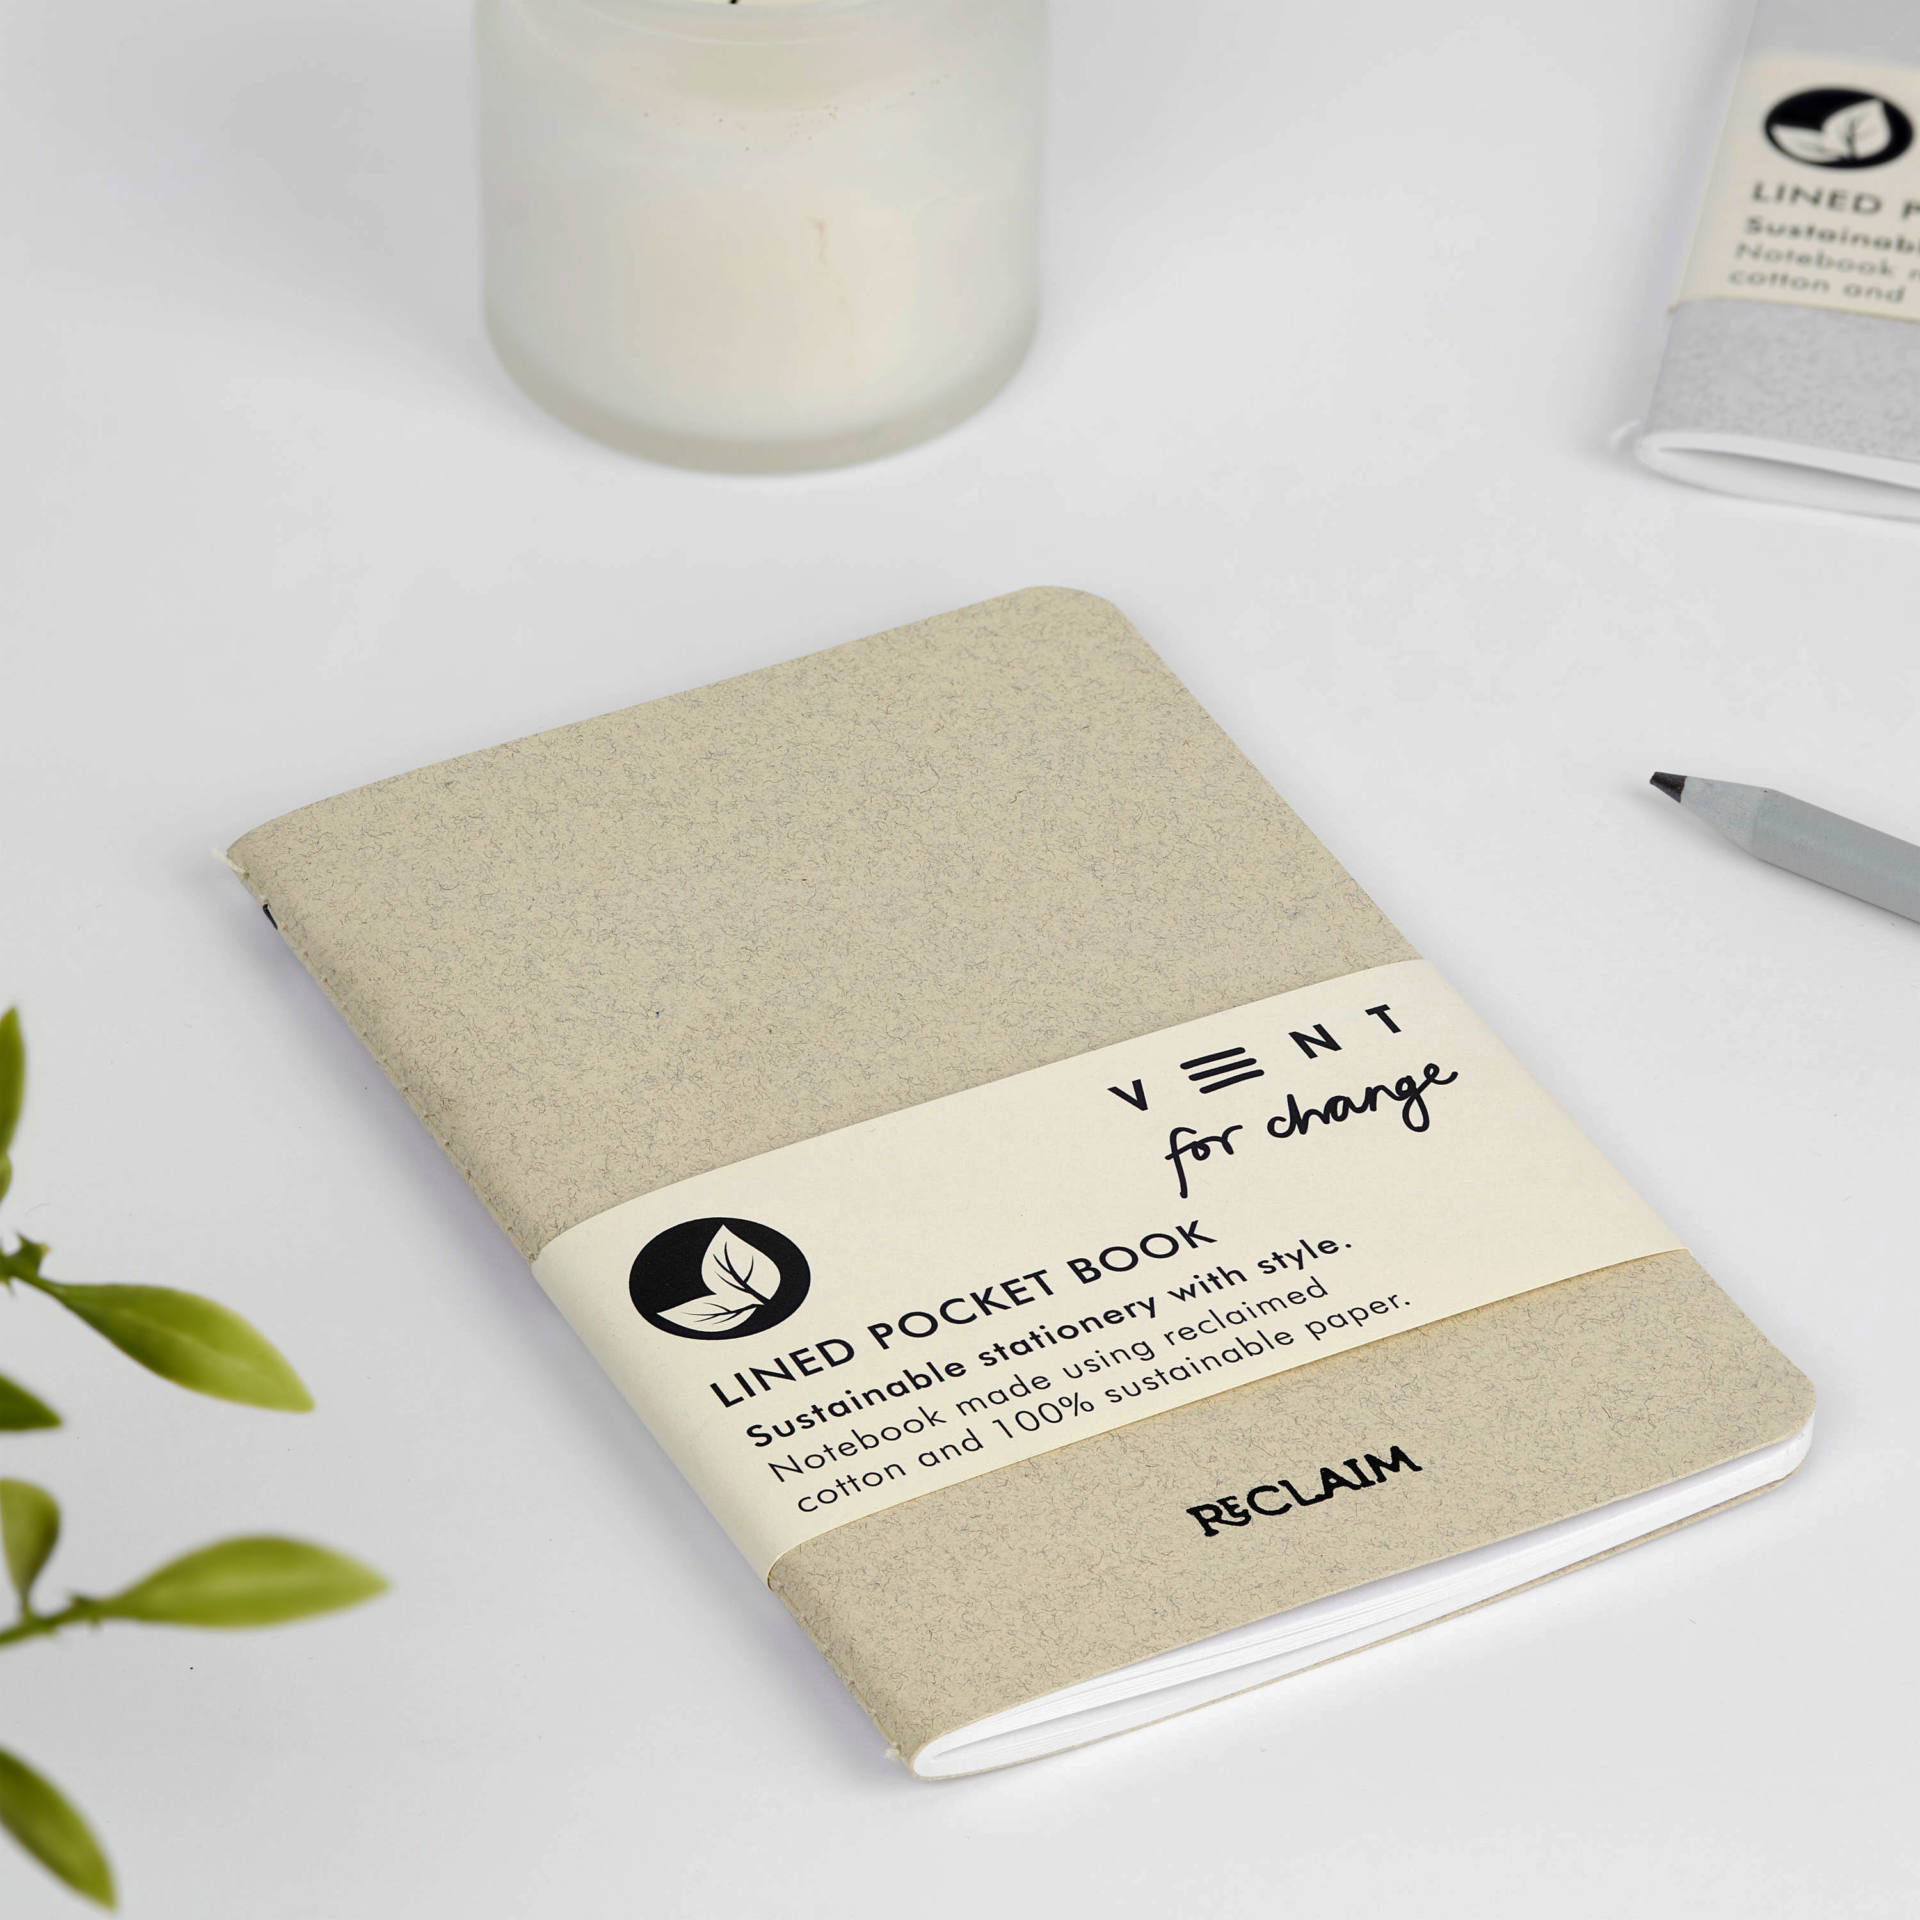 Reclaim A6 Pocket Notebook - Pearl Cotton